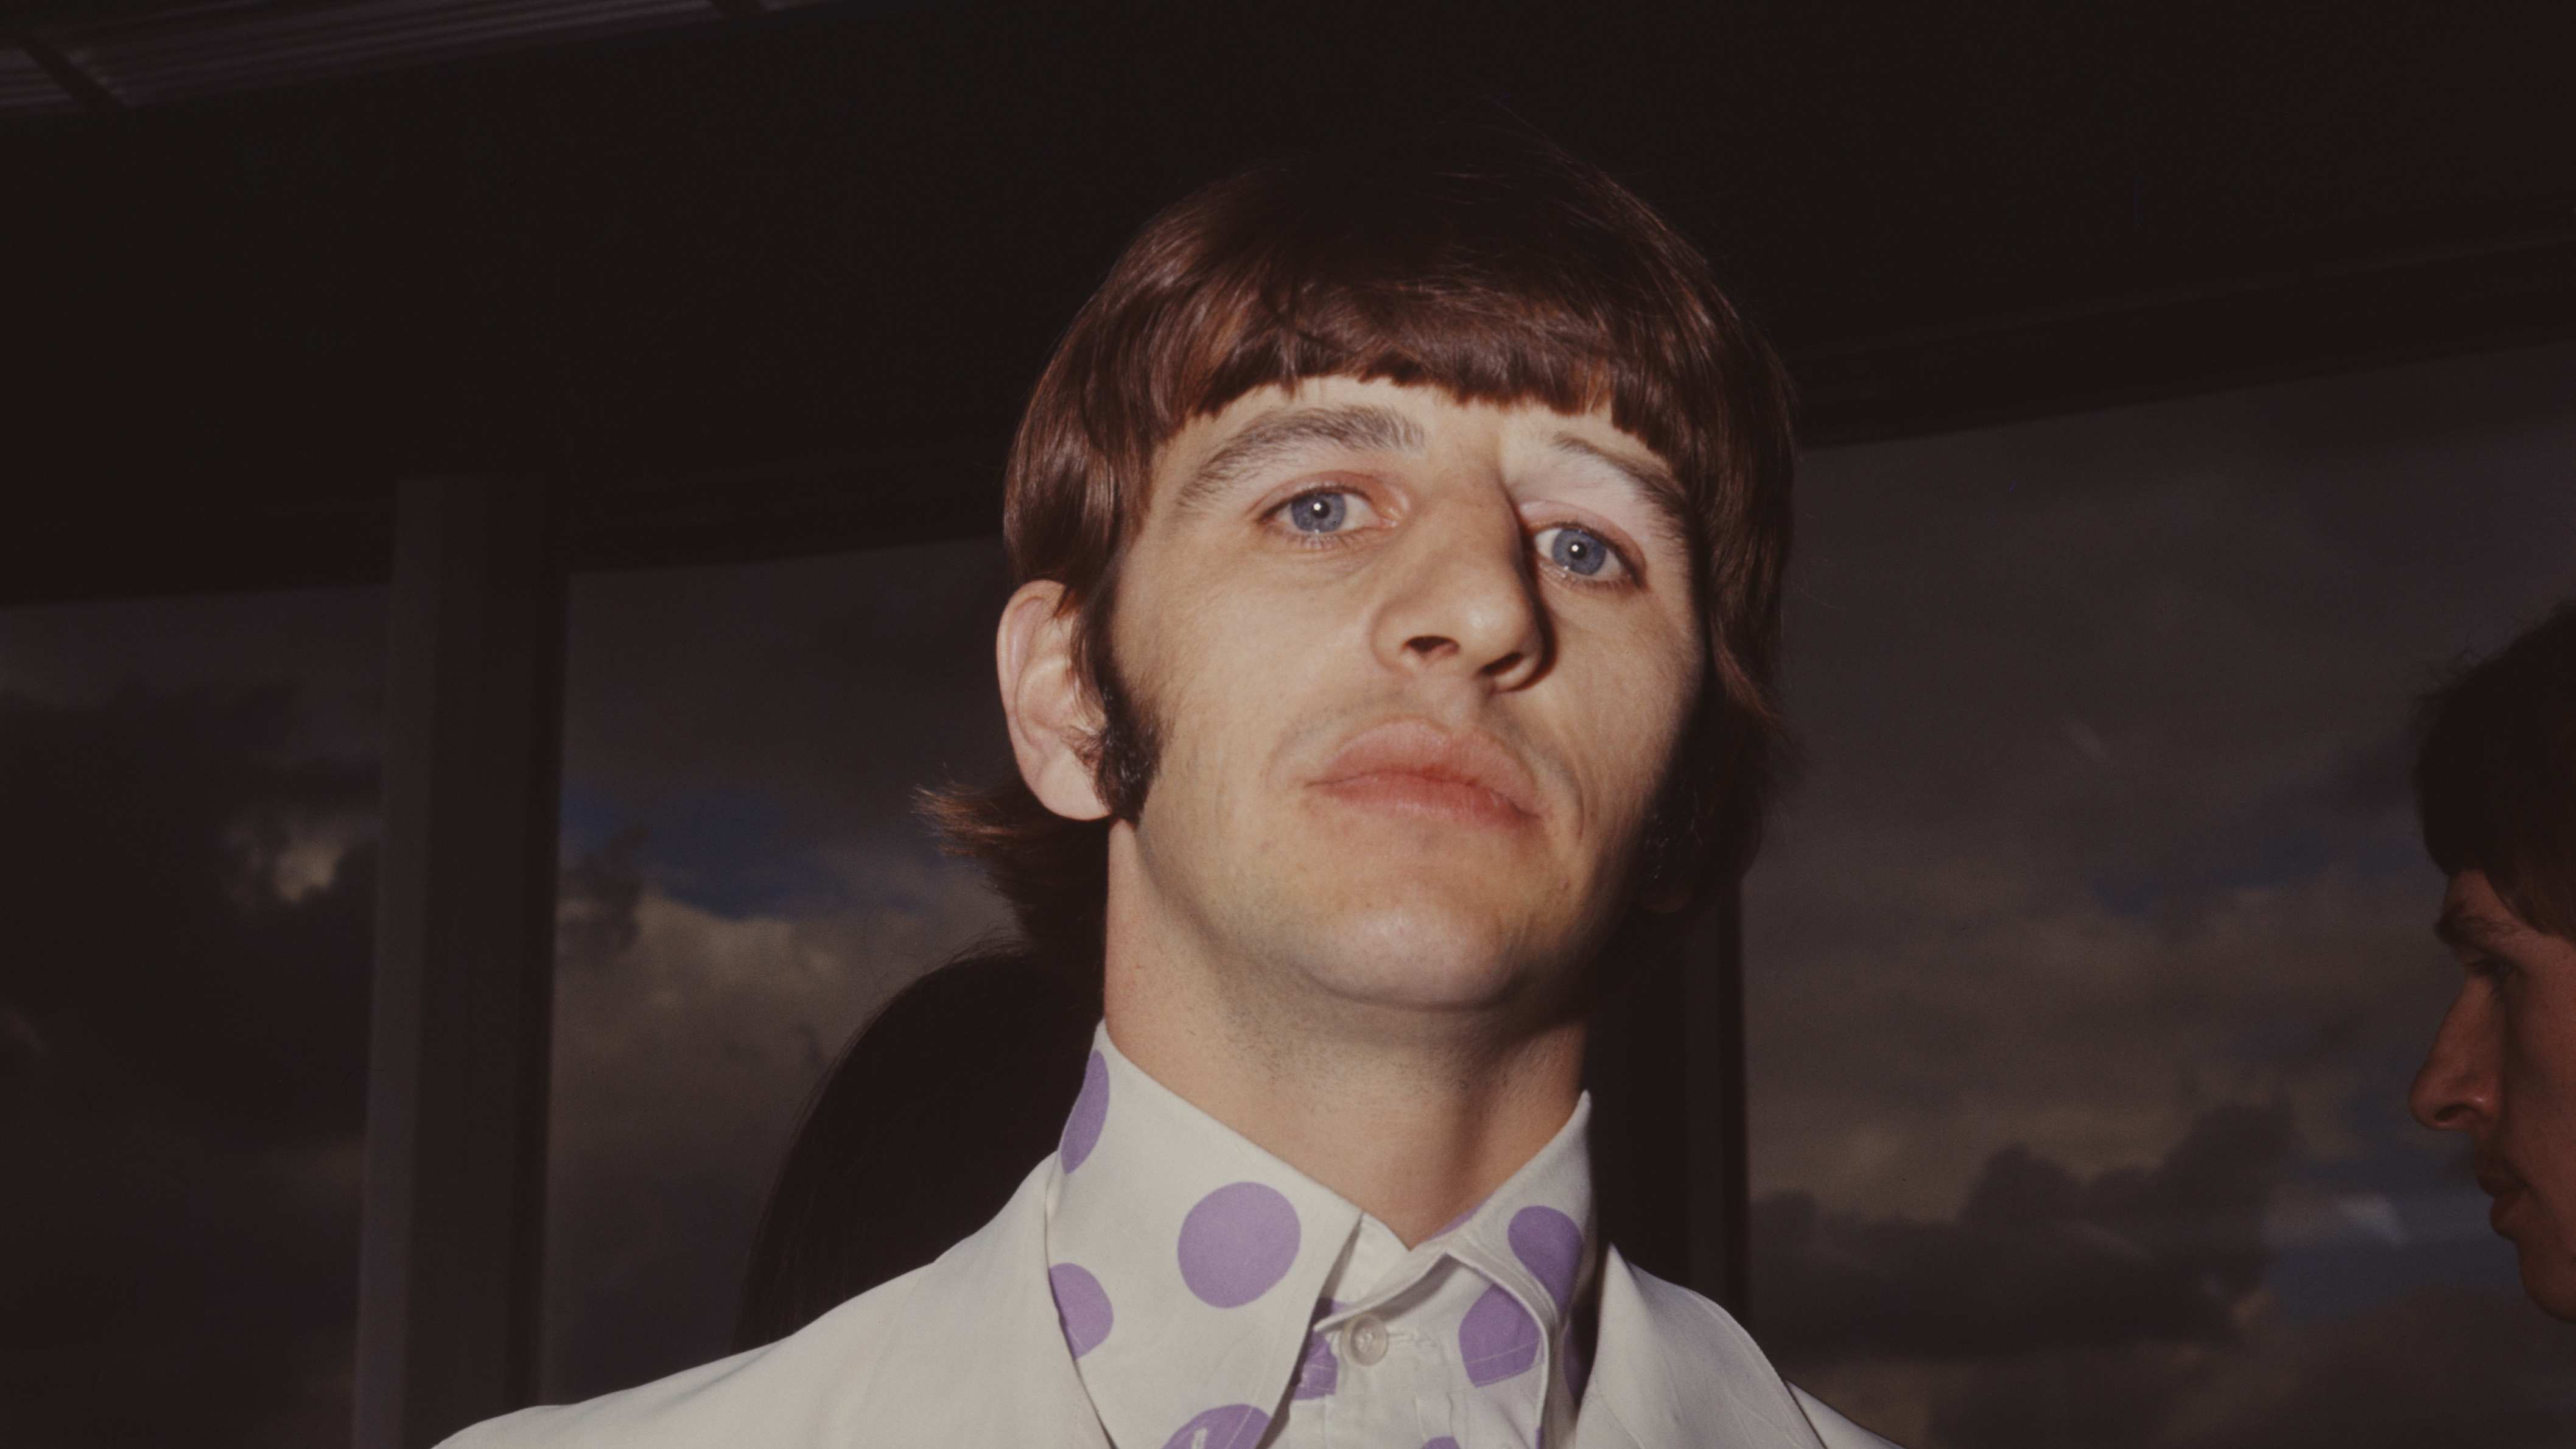 A life in pictures: Celebrating musical legend Ringo Starr